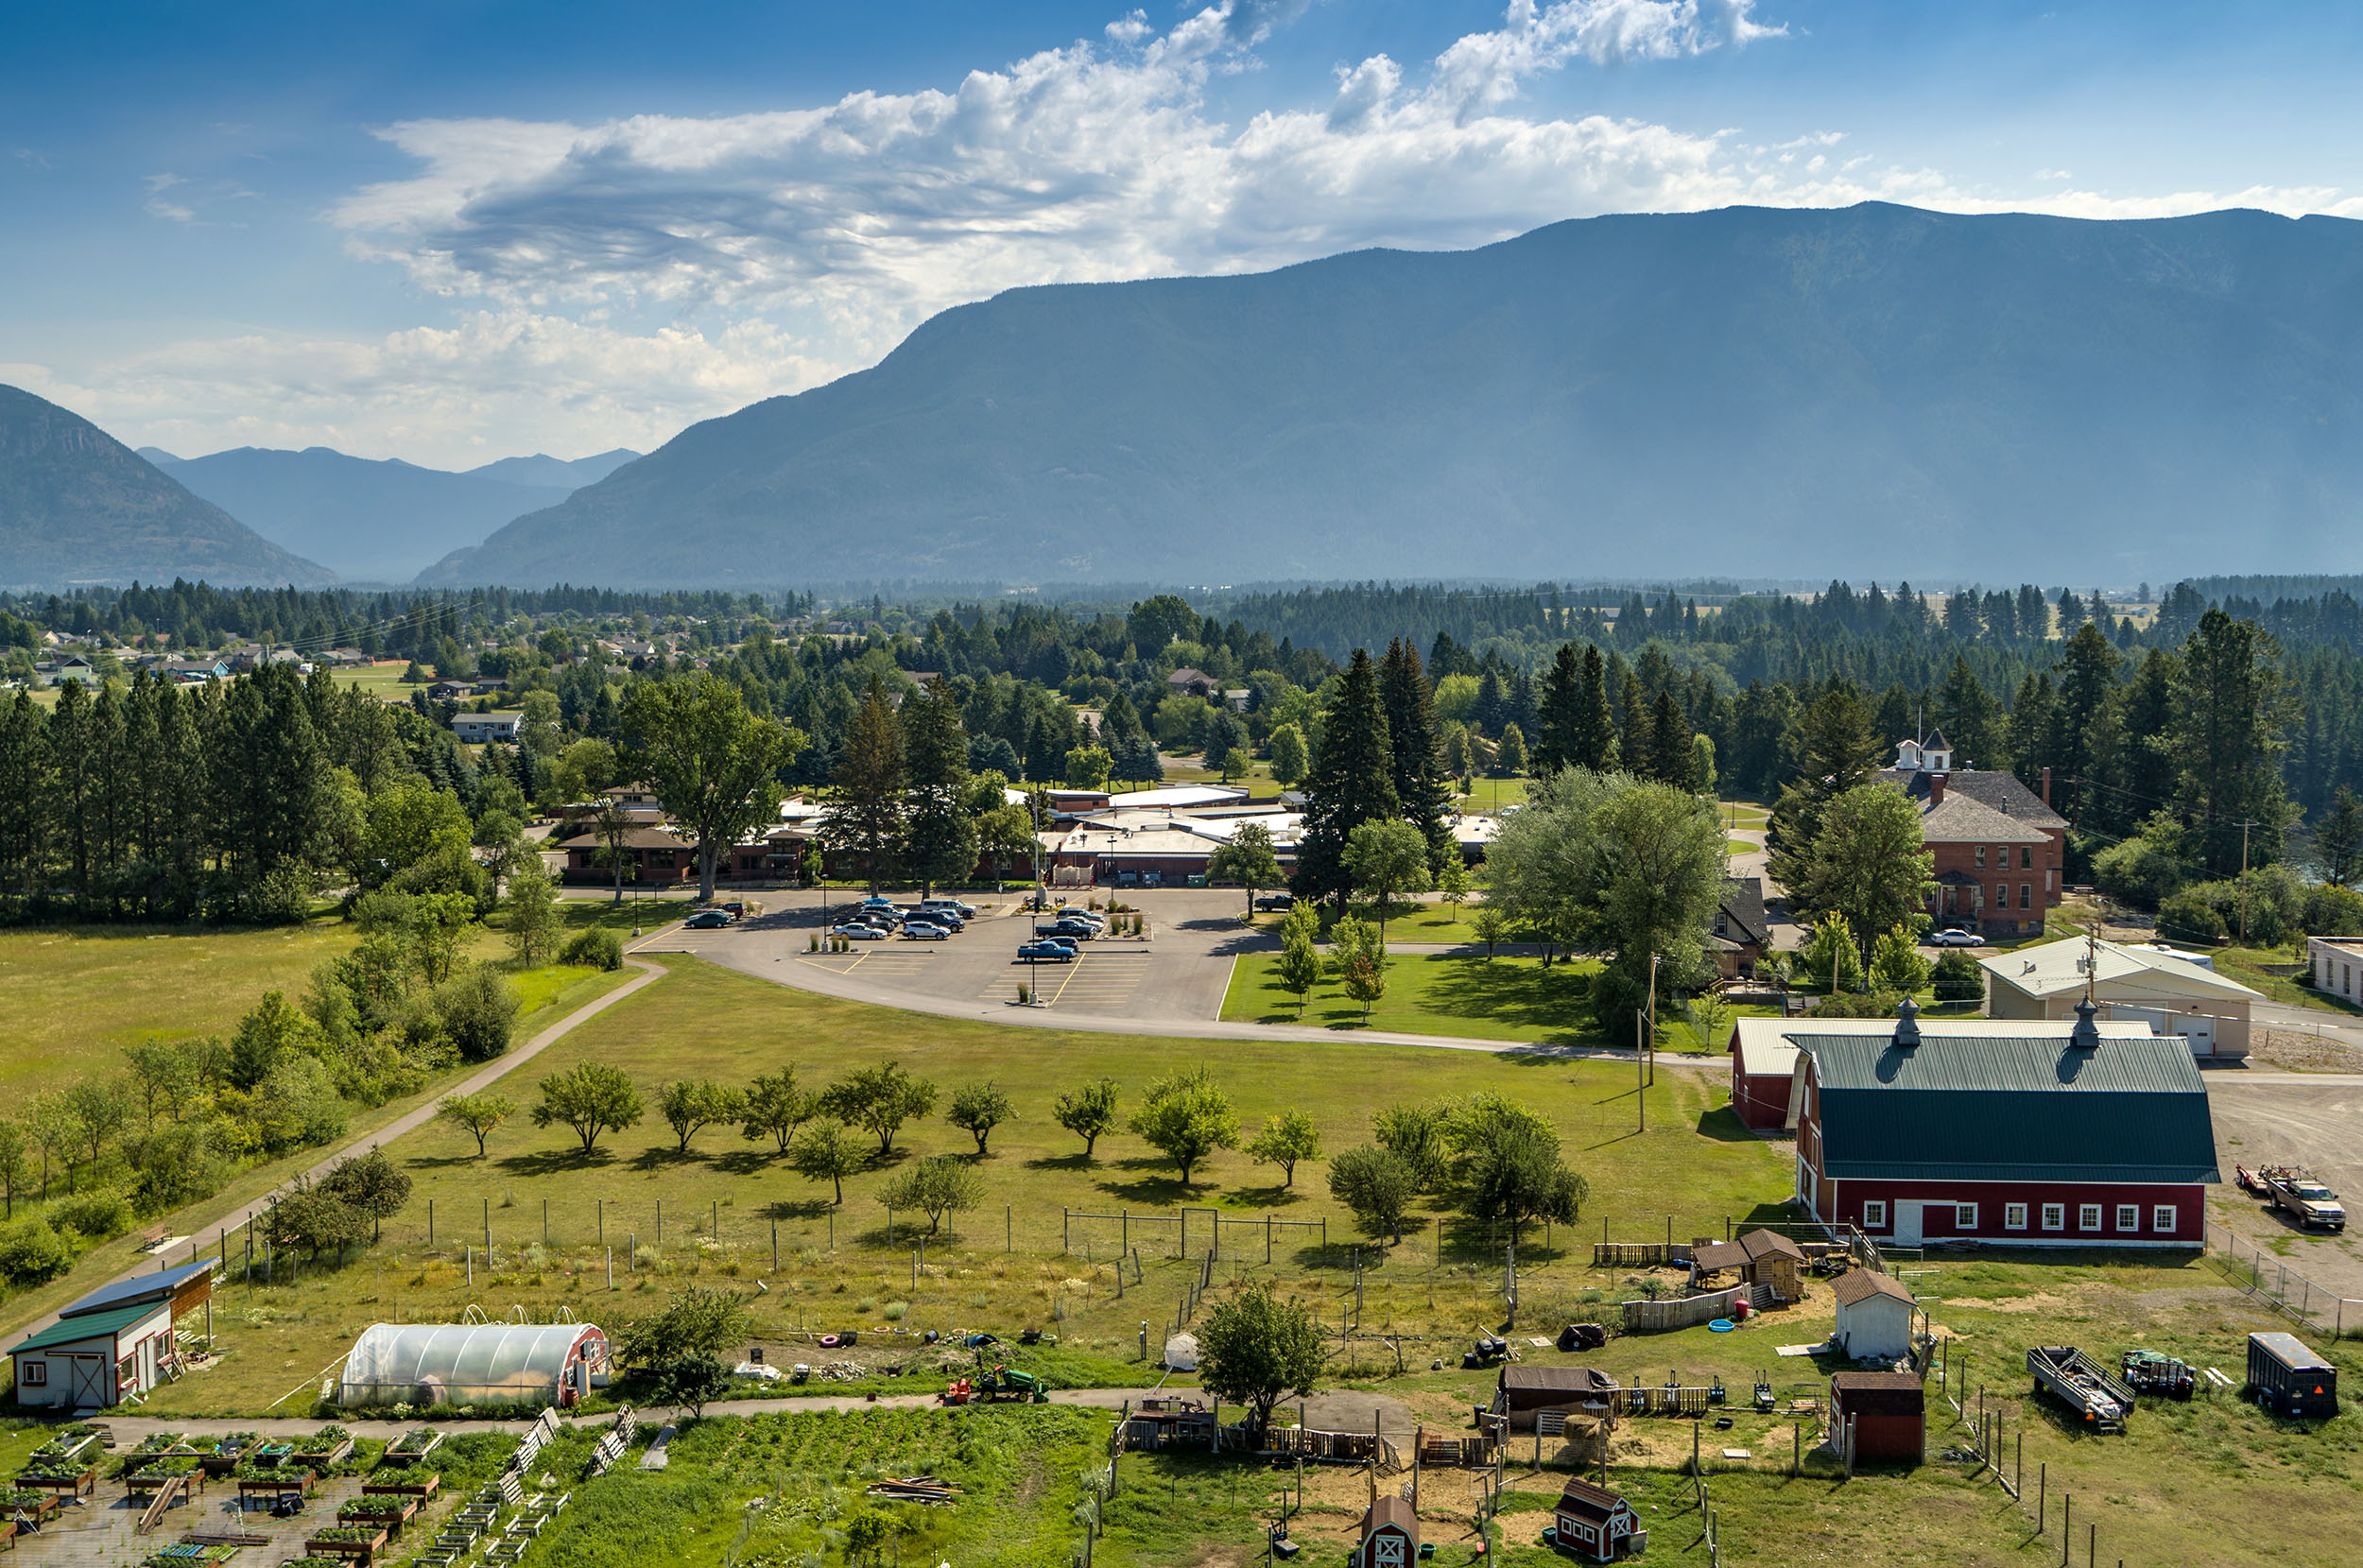 An aerial view of the grounds of the Montana Veterans home. There are large mountains in the background, as well as many trees. There is also a parking lot and several buildings.